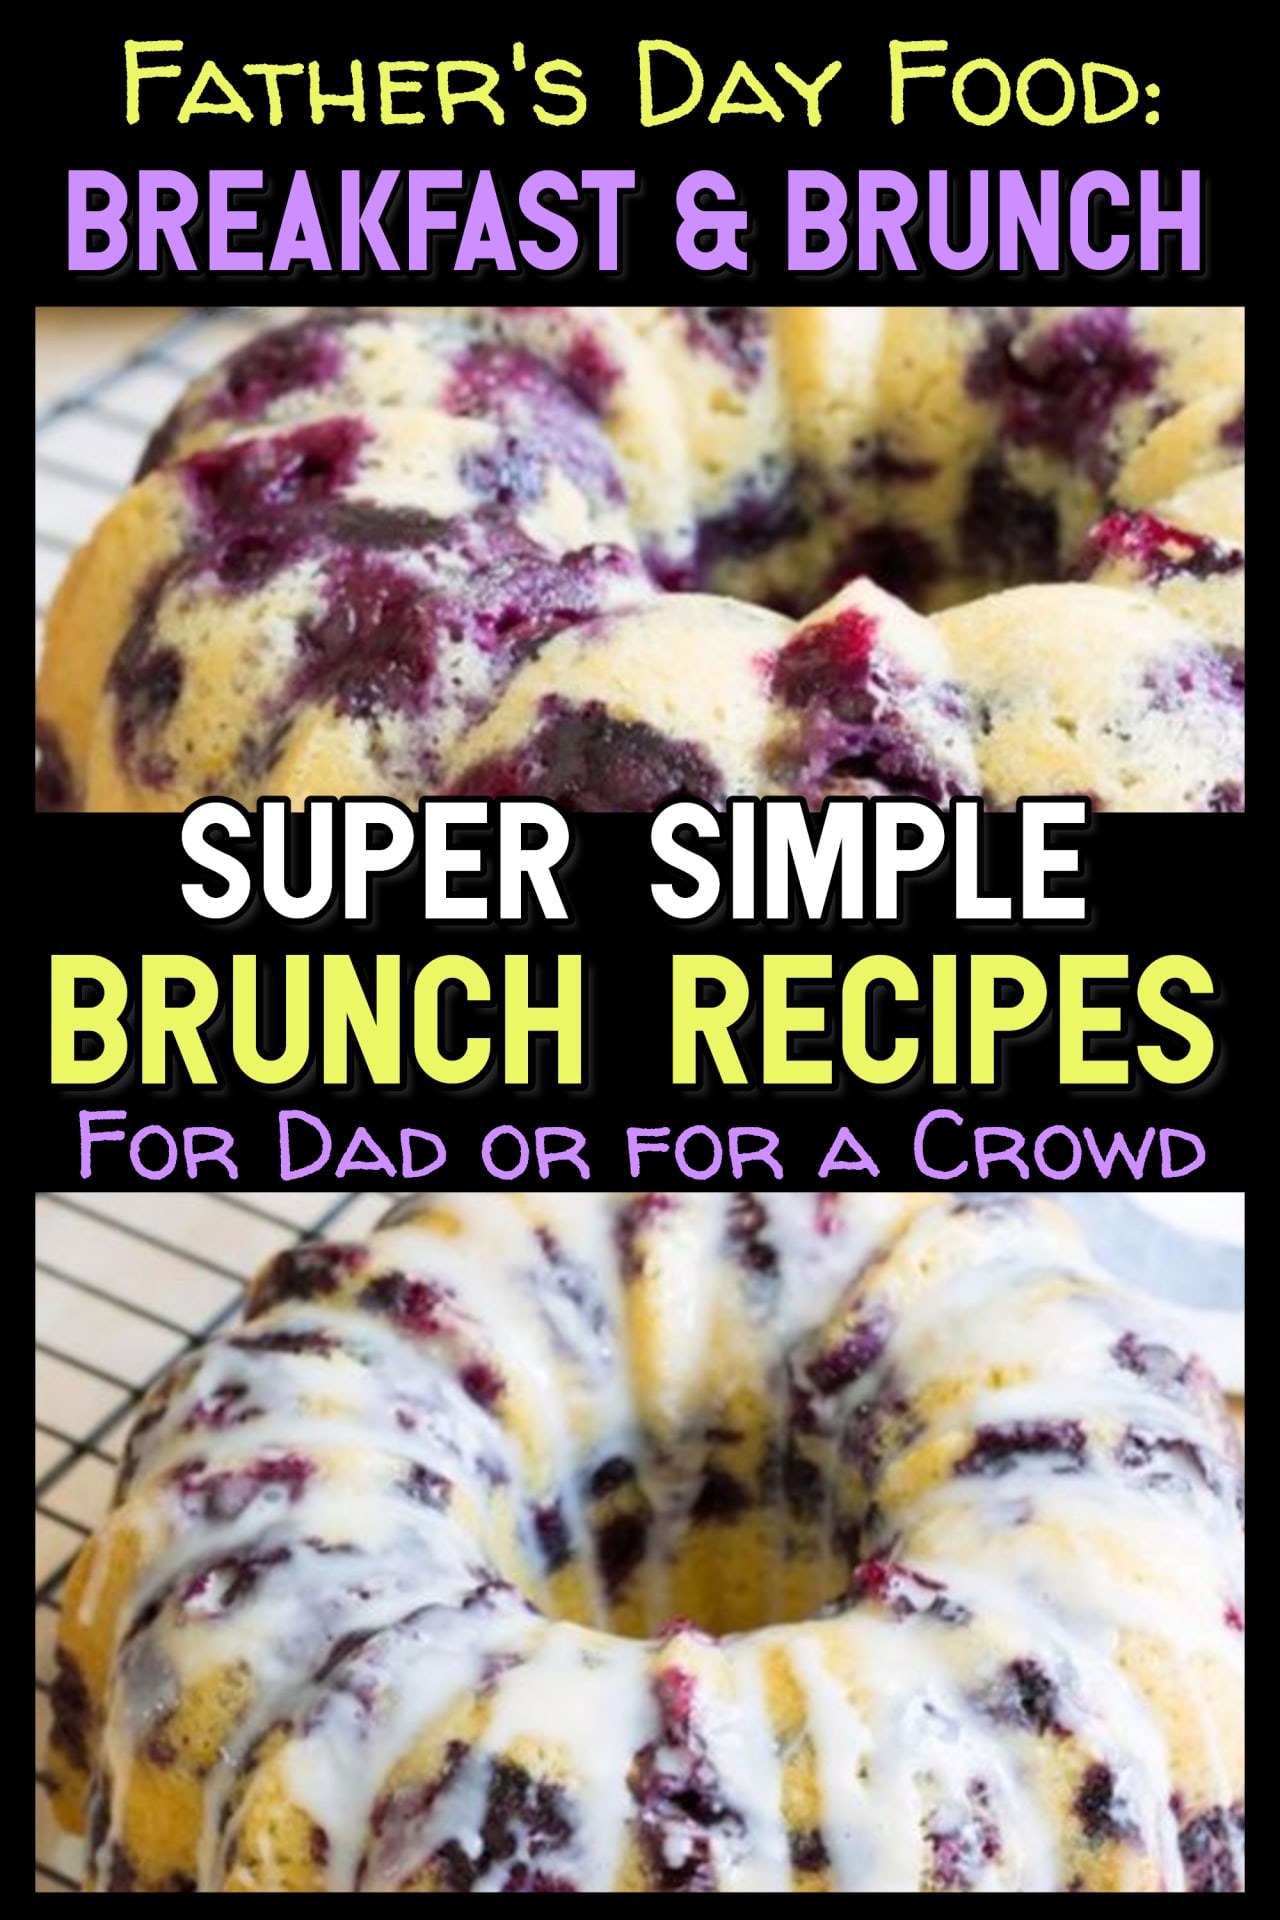 Fathers Day Brunch and Breakfast Ideas For Dad or For a Crowd. What to cook for Father's Day breakfast for dad or breakfast for a crowd? These brunch recipes are perfect for breakfast in bed for dad or for your family Fathers Day brunch get-together!  Make ahead breakfast casserole recipes and easy make ahead brunch food recipes and ideas.